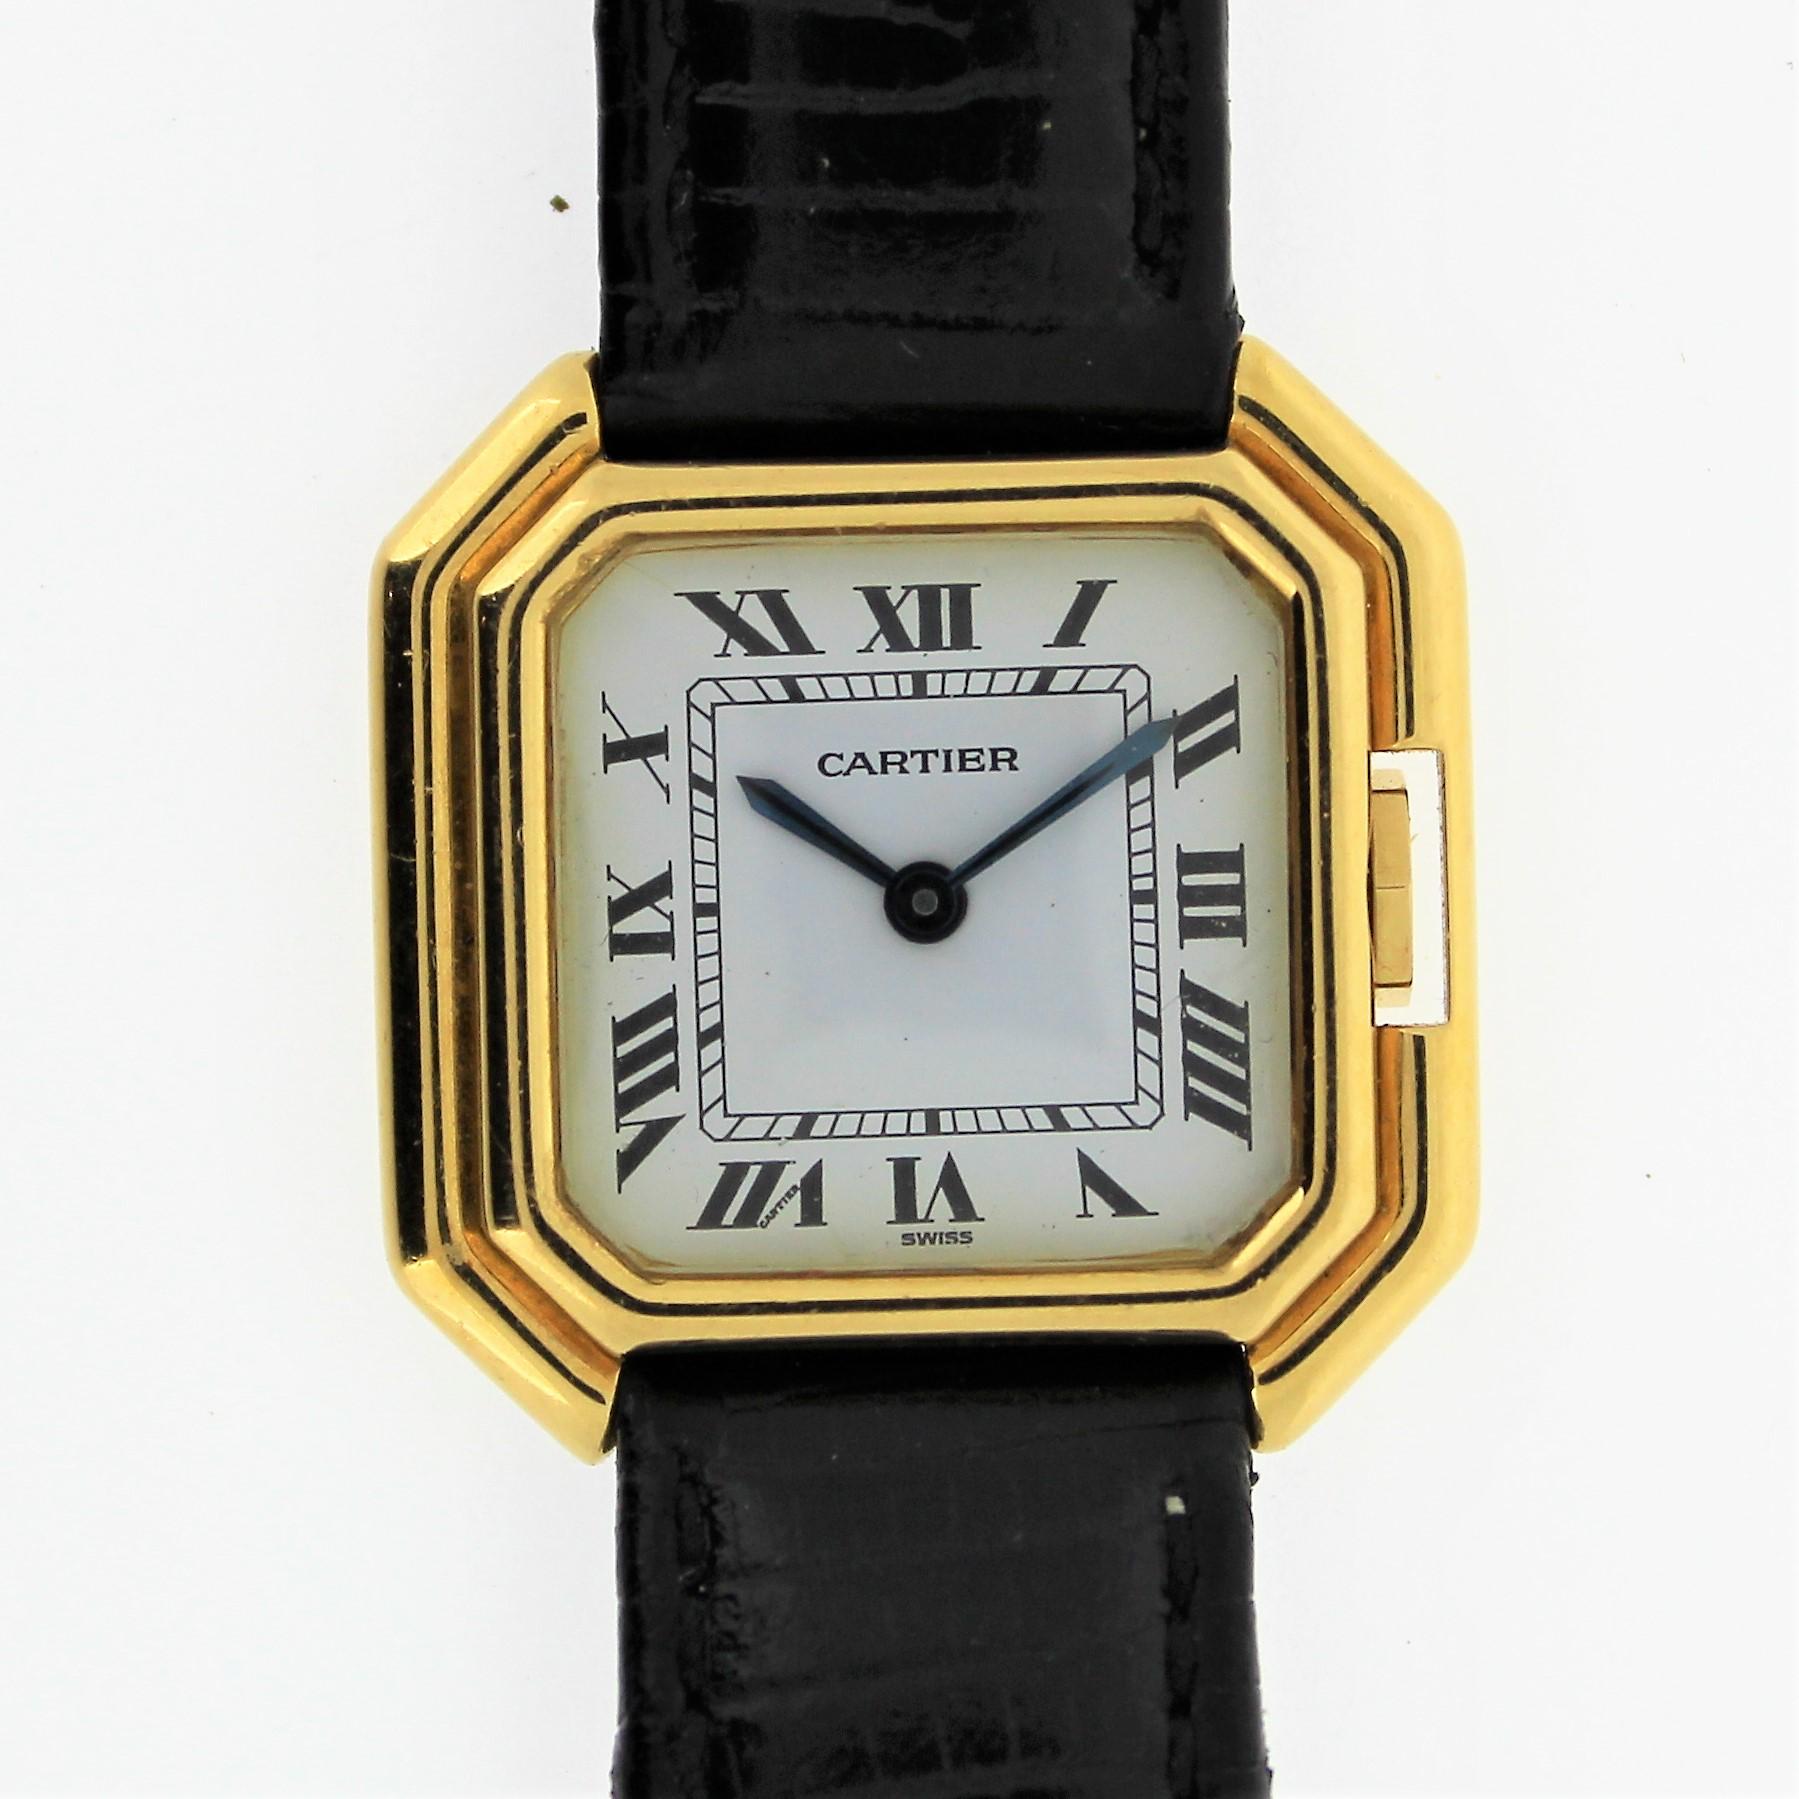 Introduction:
This Vintage Cartier Paris Centure Octagon Shape is the small size, circa 1975-1980.  It is 18K yellow gold and measures 27 x 27 mm with a mechanical manual wind 17-jewel movement.  It has the original black lizard strap with 18K